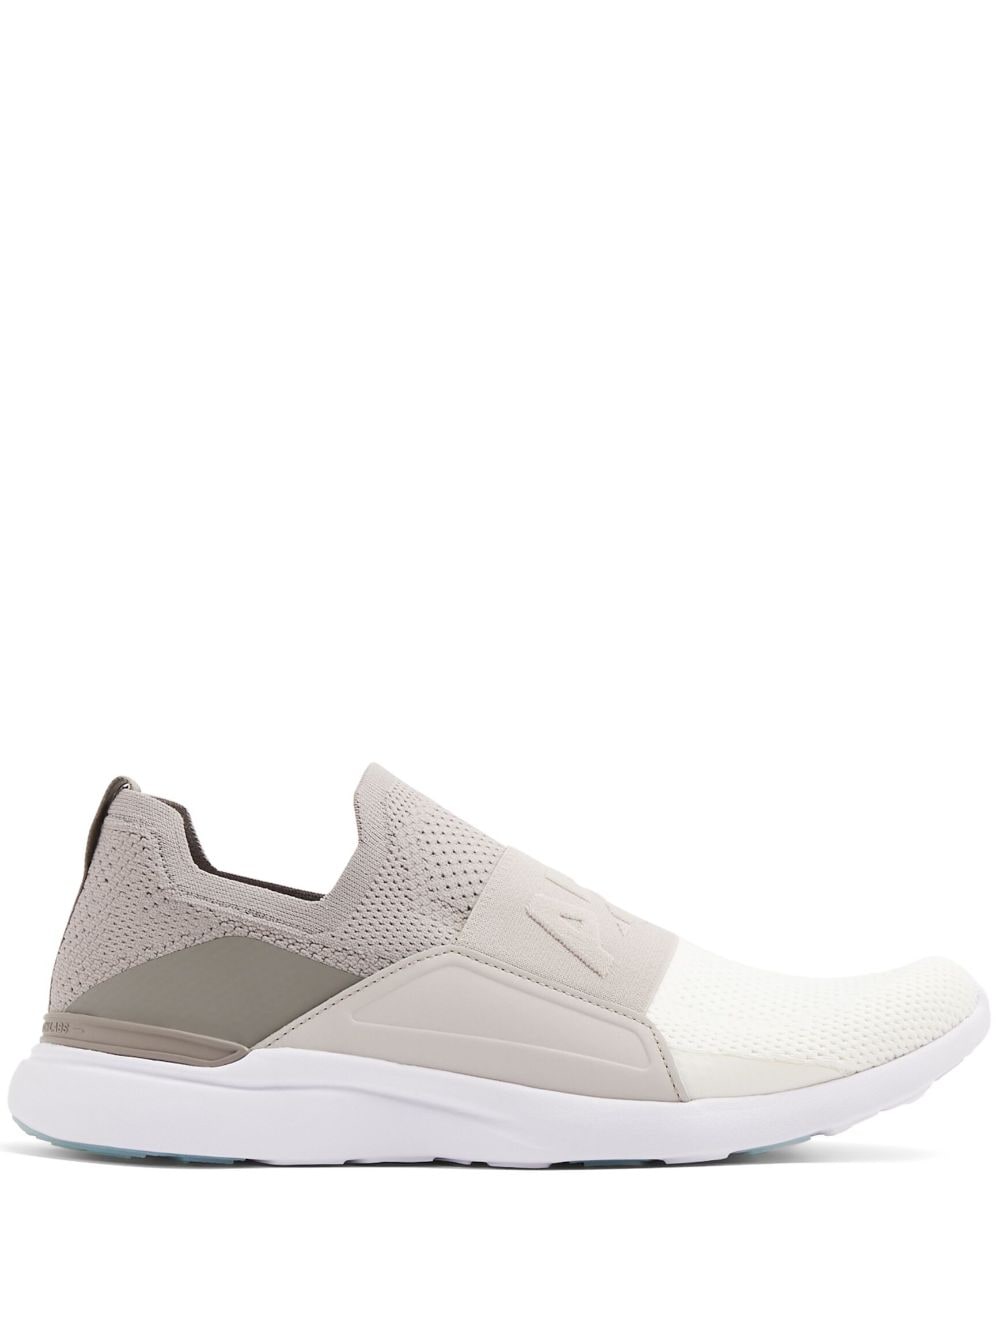 APL: ATHLETIC PROPULSION LABS Slip-On-Sneakers mit Logo - Nude von APL: ATHLETIC PROPULSION LABS